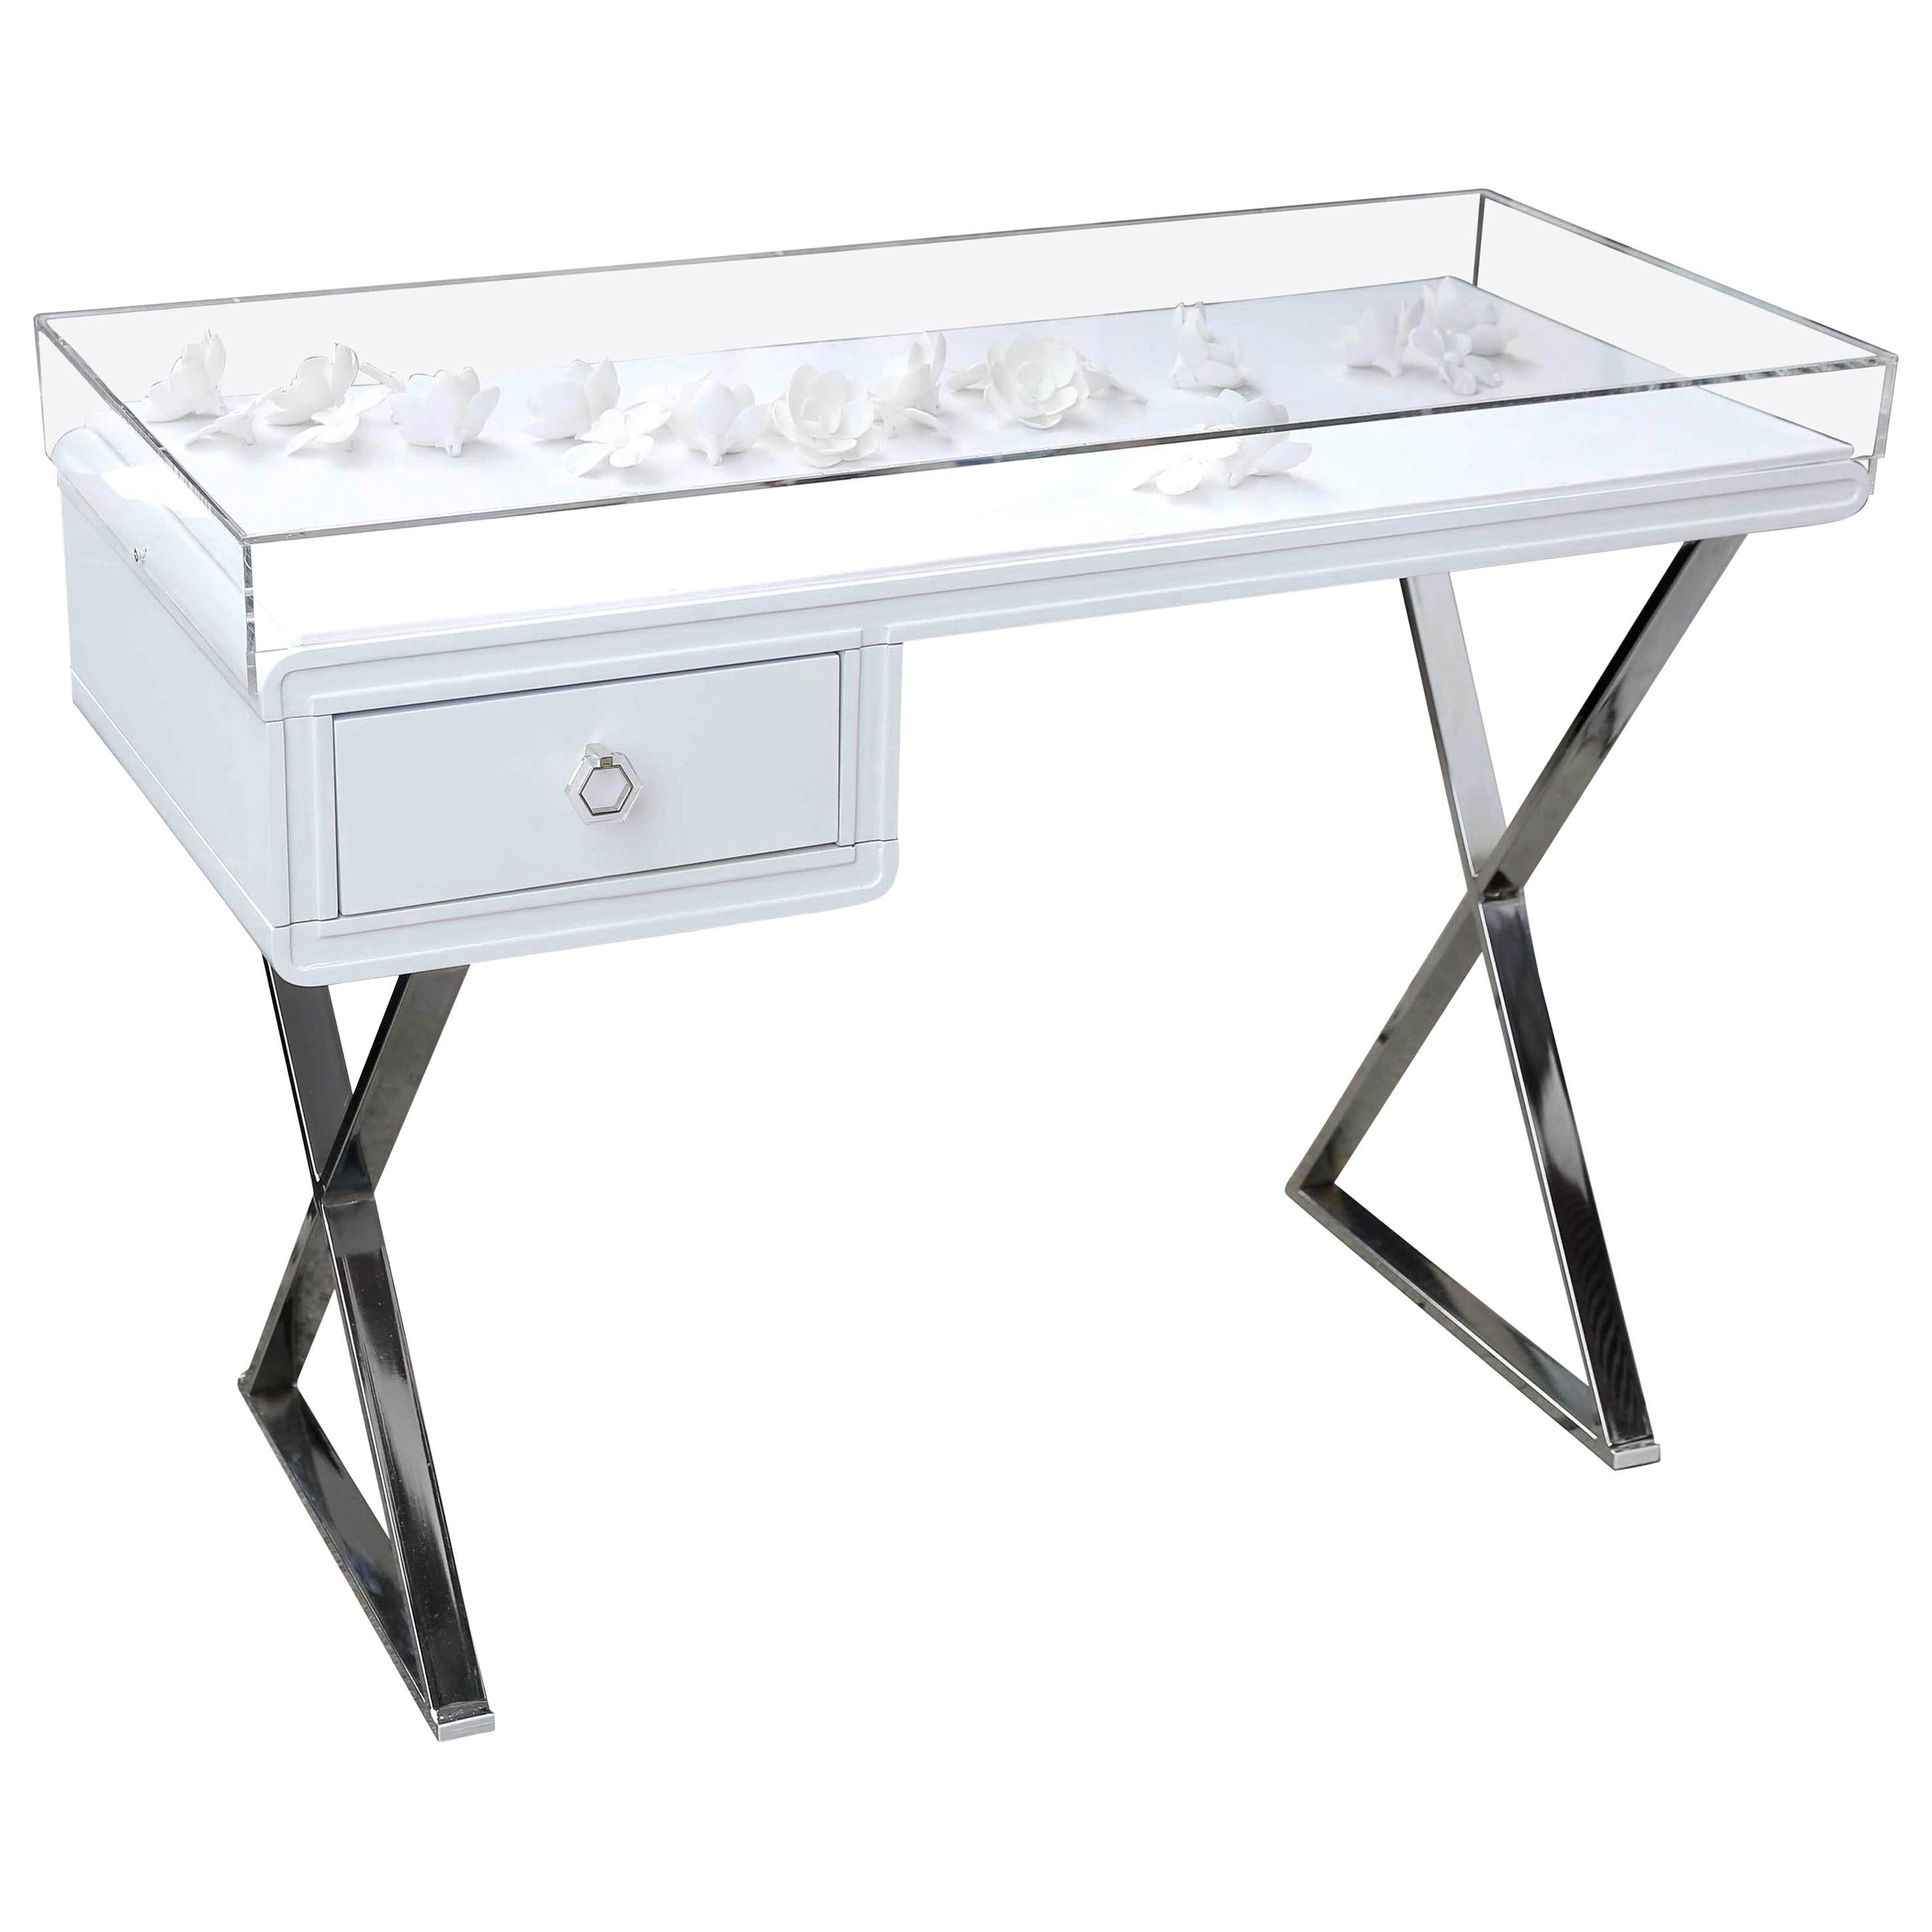 Lucite Object D'art White Lacquer & Metal X Base Desk by AMK for Patricia Kagan